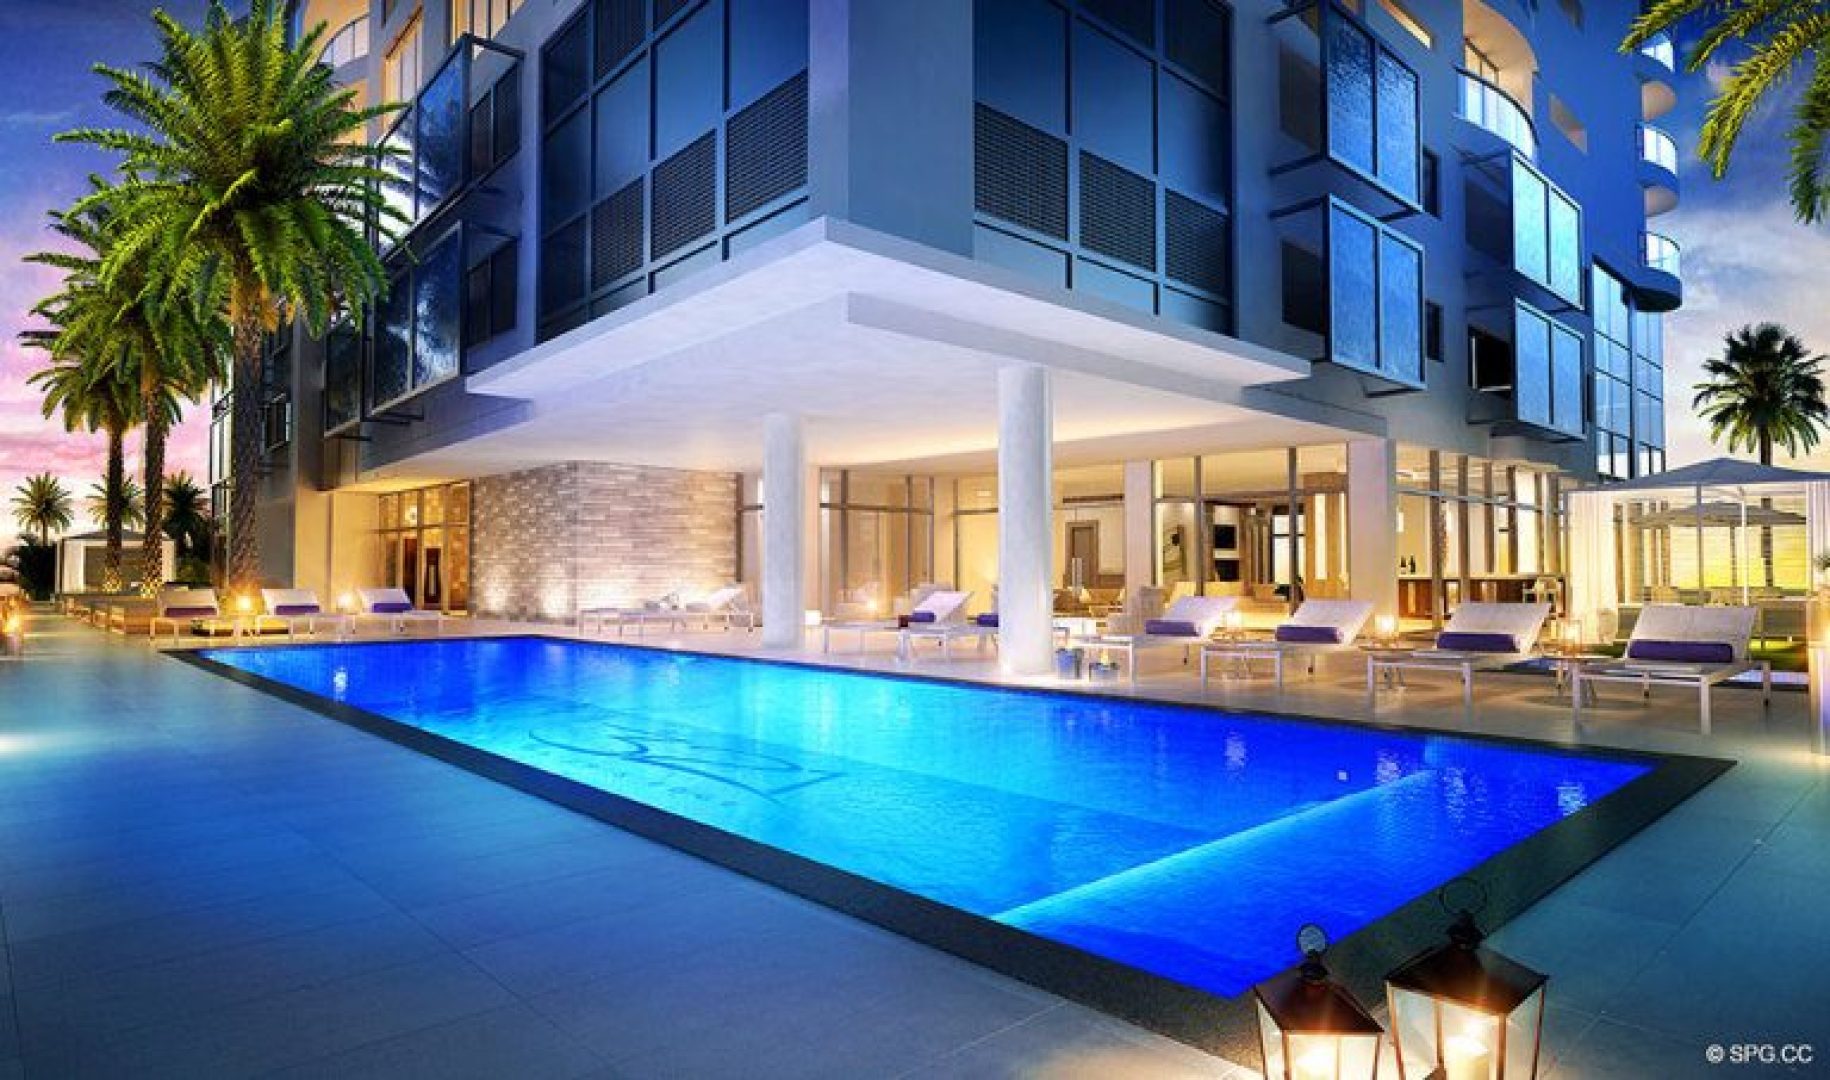 Poolside Evenings at 321 at Water's Edge, Luxury Waterfront Condos in Fort Lauderdale, Florida 33304